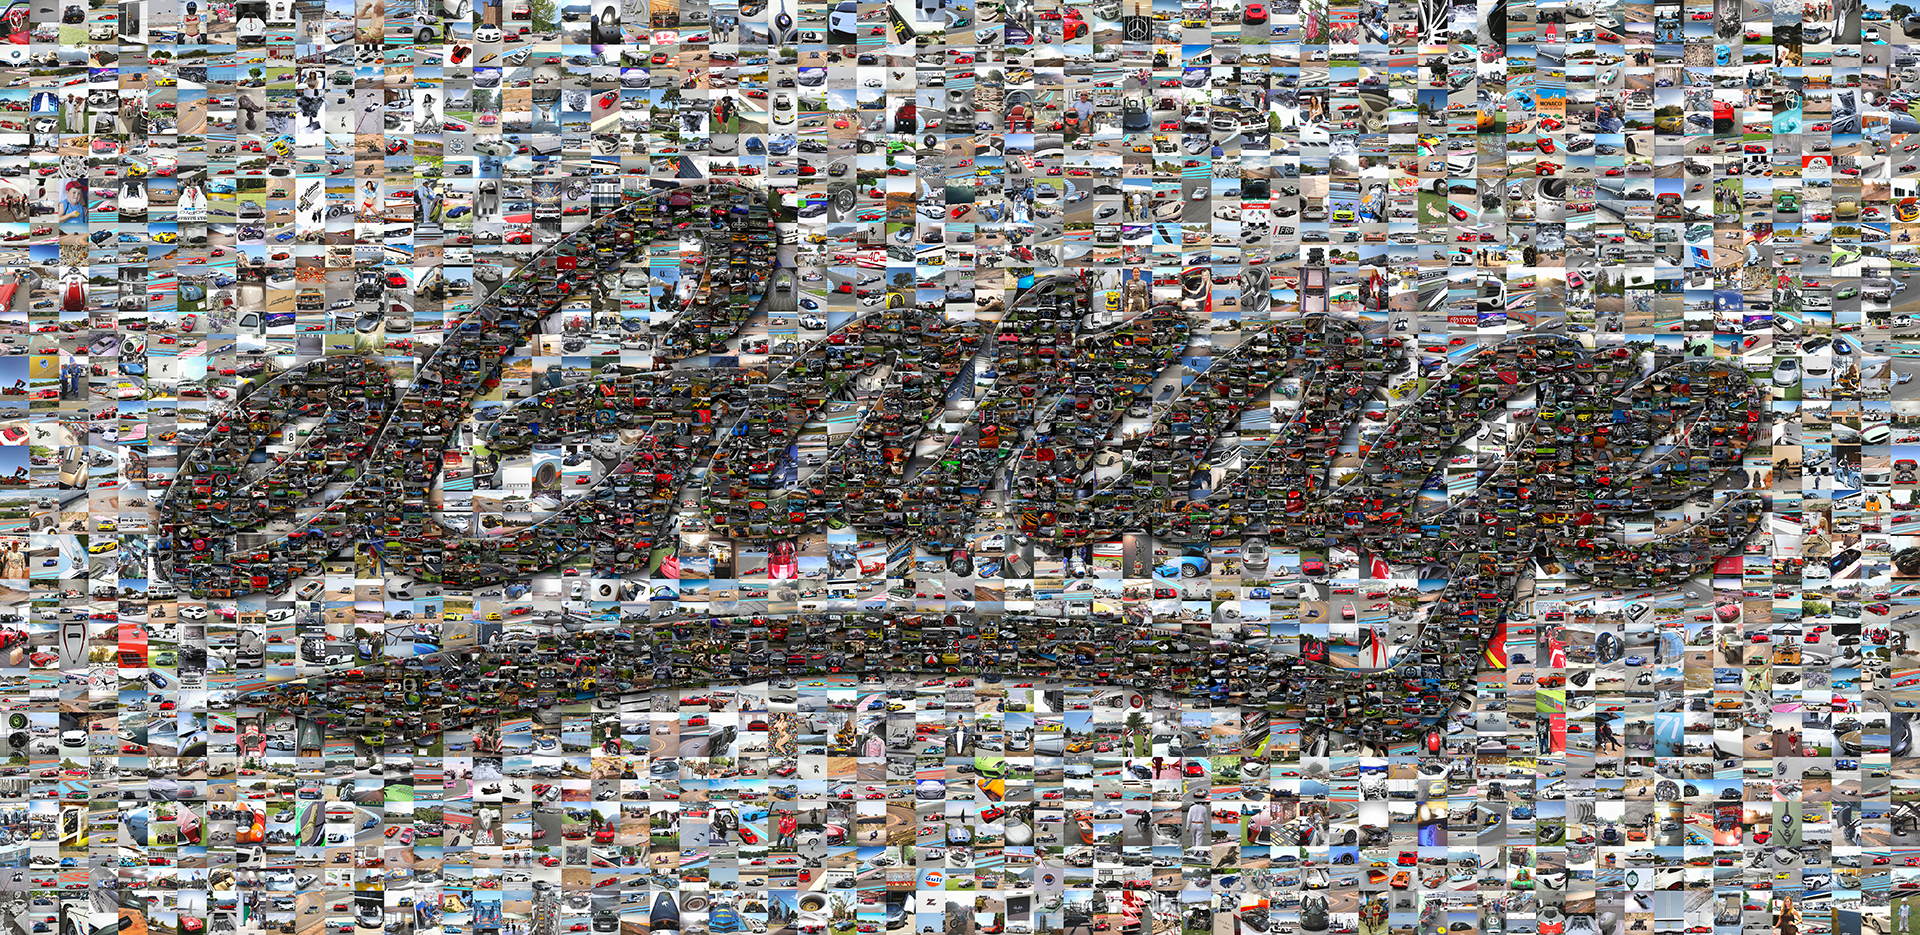 photo mosaic a collection of over 6700 automobiles make up this eGarage mosaic mural